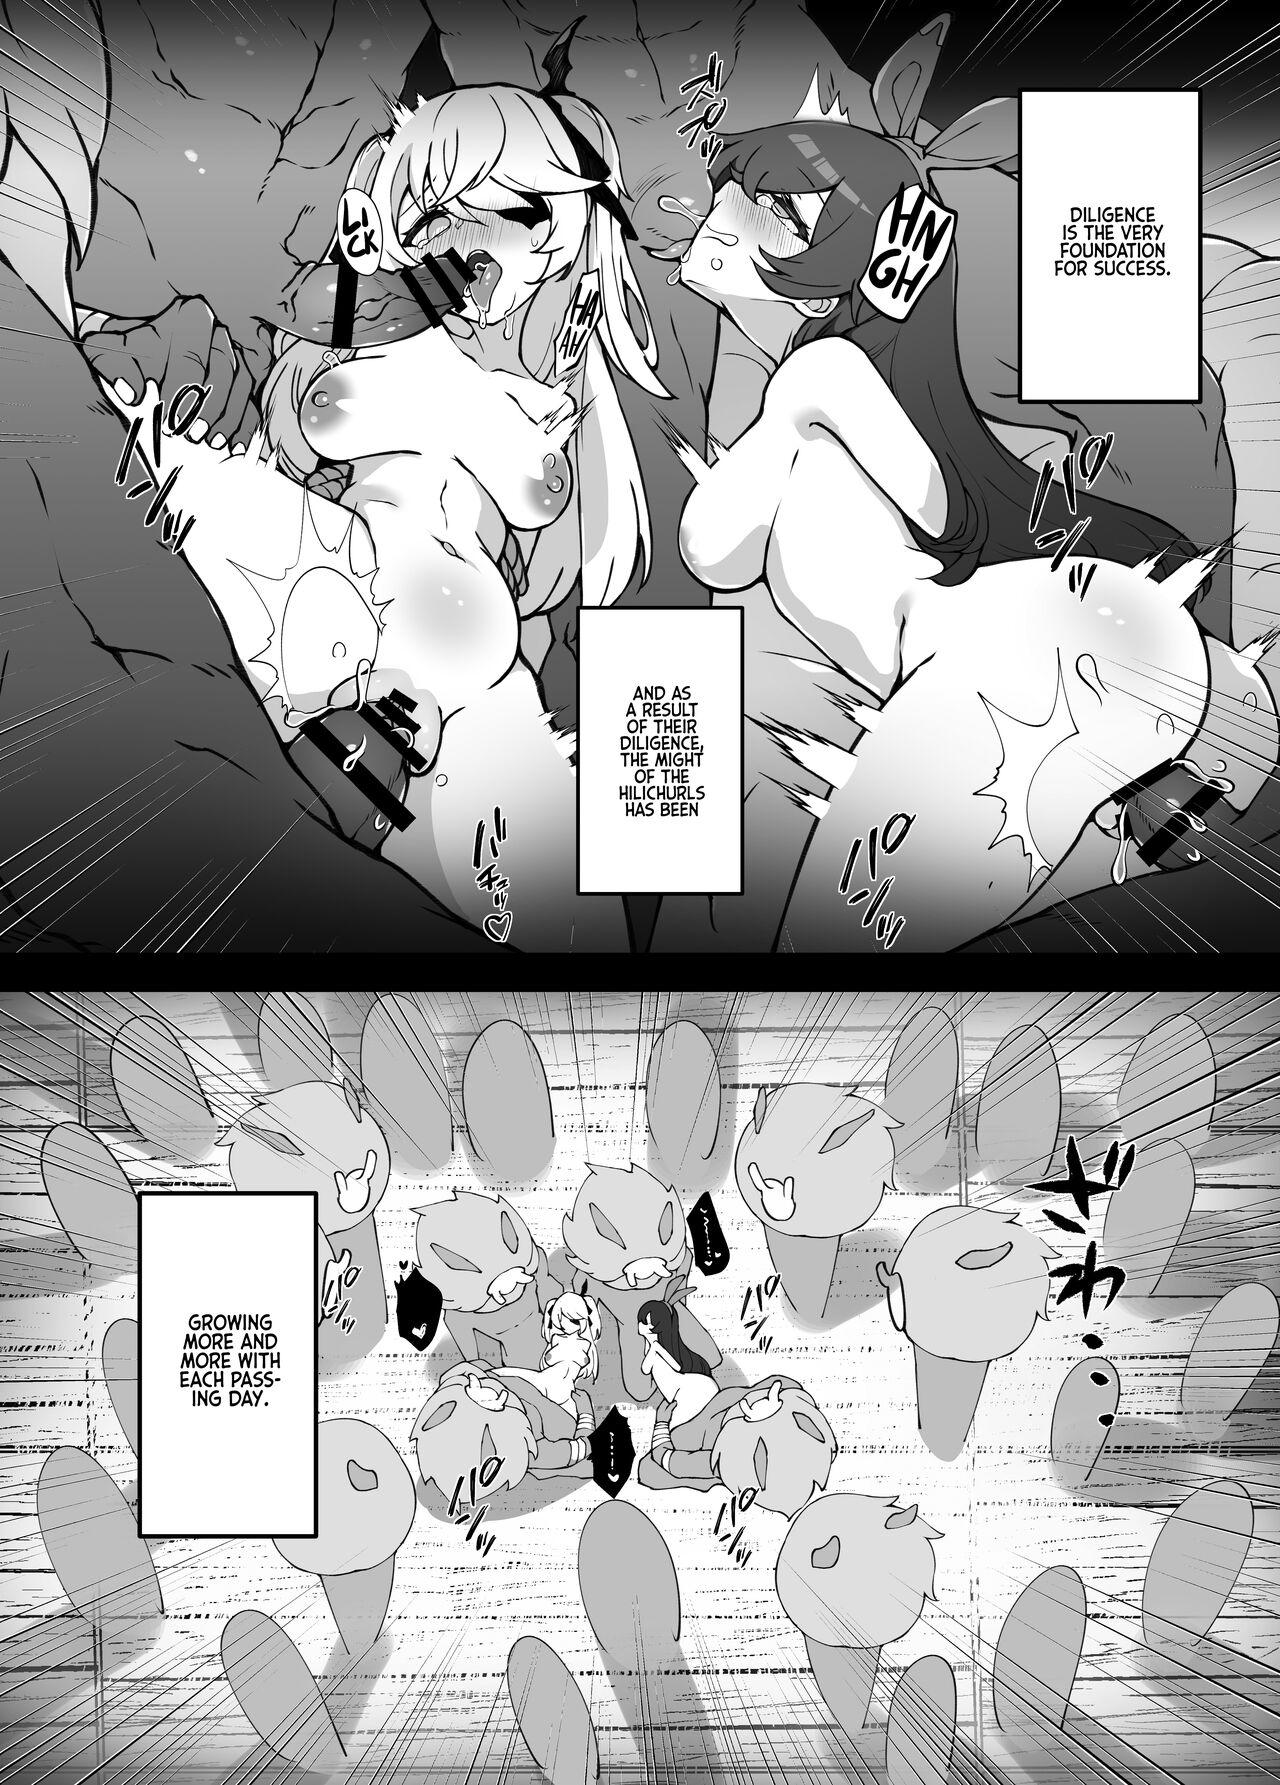 Menage [Karouke (Karou)] The Attack of the Hilichurls II ~The Invasion's Prelude~ Noelle,Chivalric Blossom that withered~ (Genshin Impact) [English] [Kyuume] [Digital] - Genshin impact Free Blow Job - Page 5